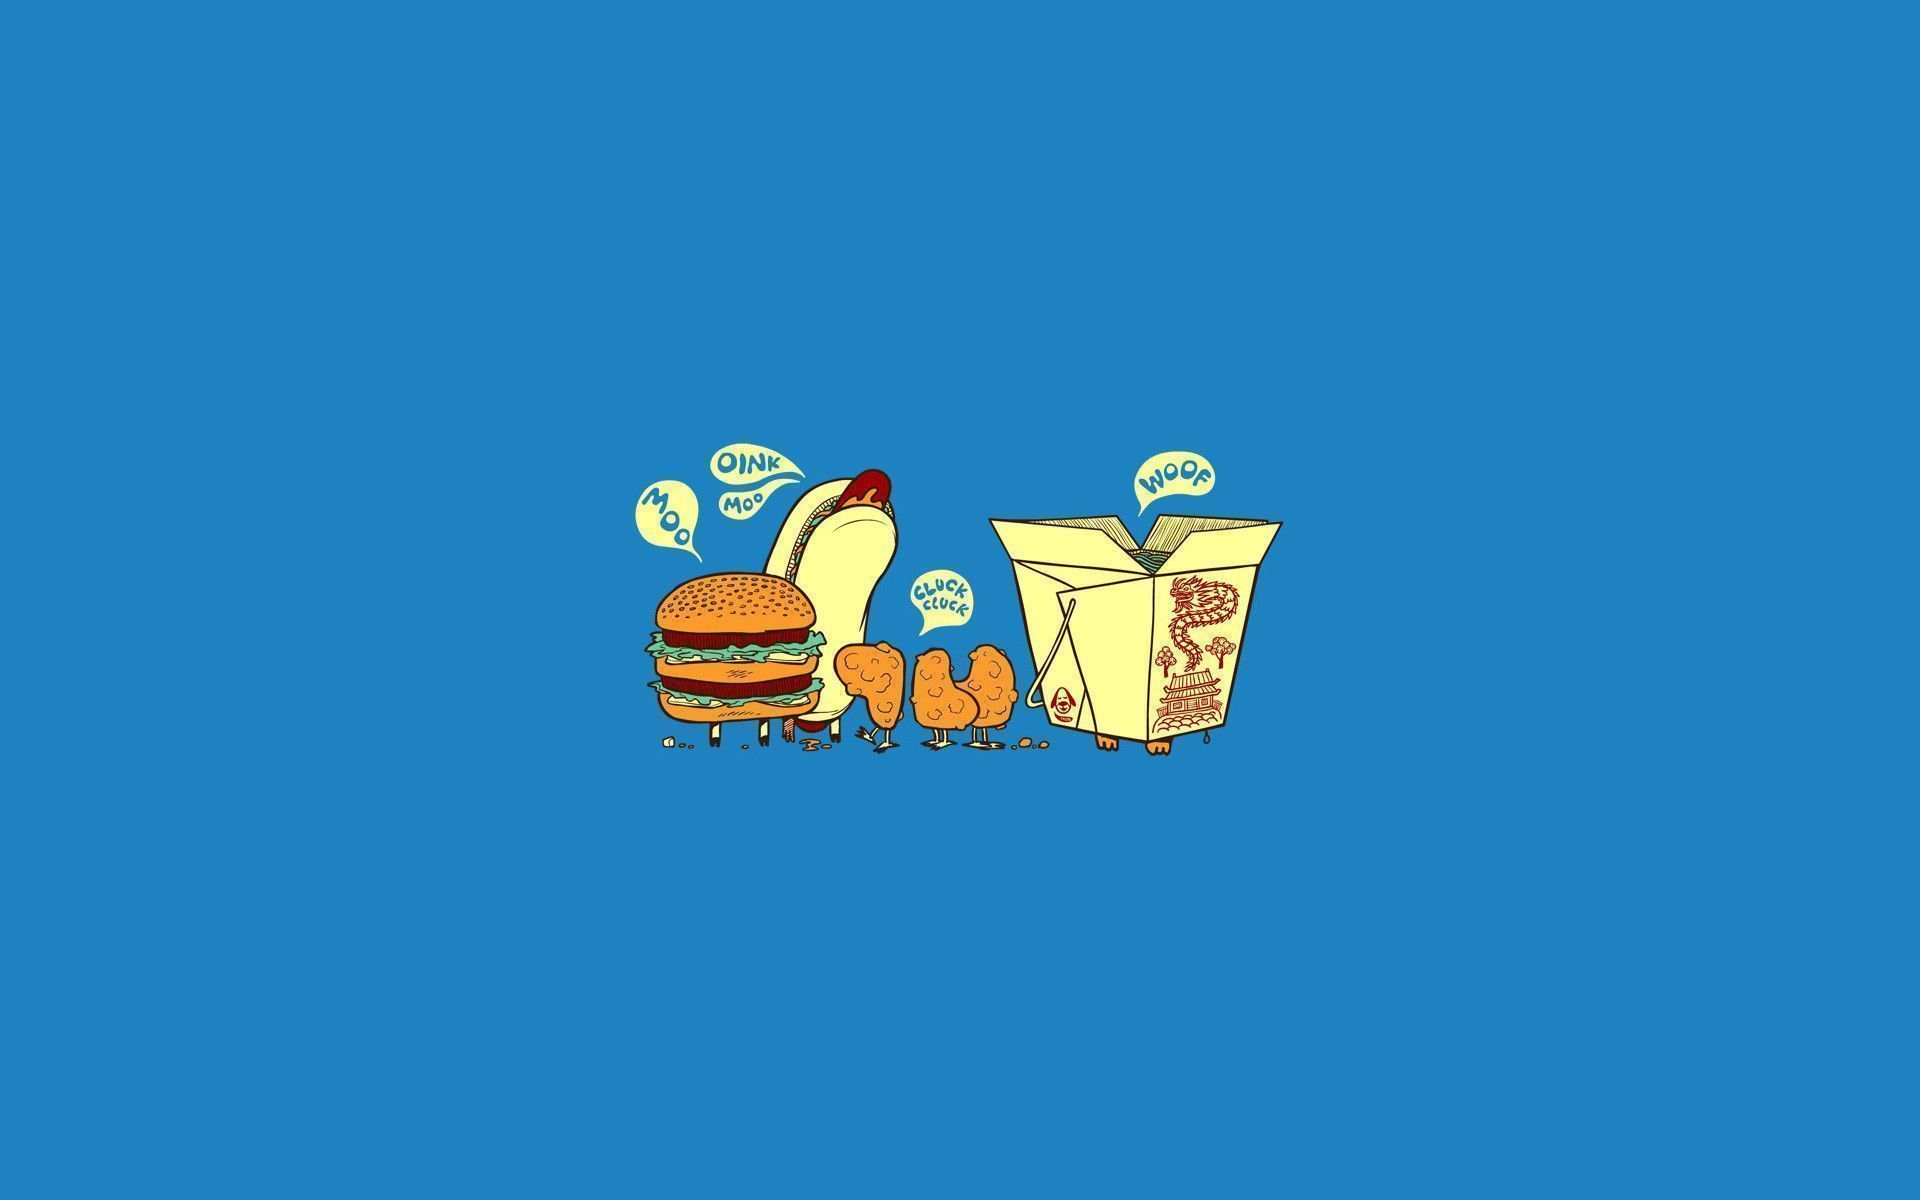 Funny PC Wallpaper. Cute computer background, Cute food wallpaper, Funny computer background